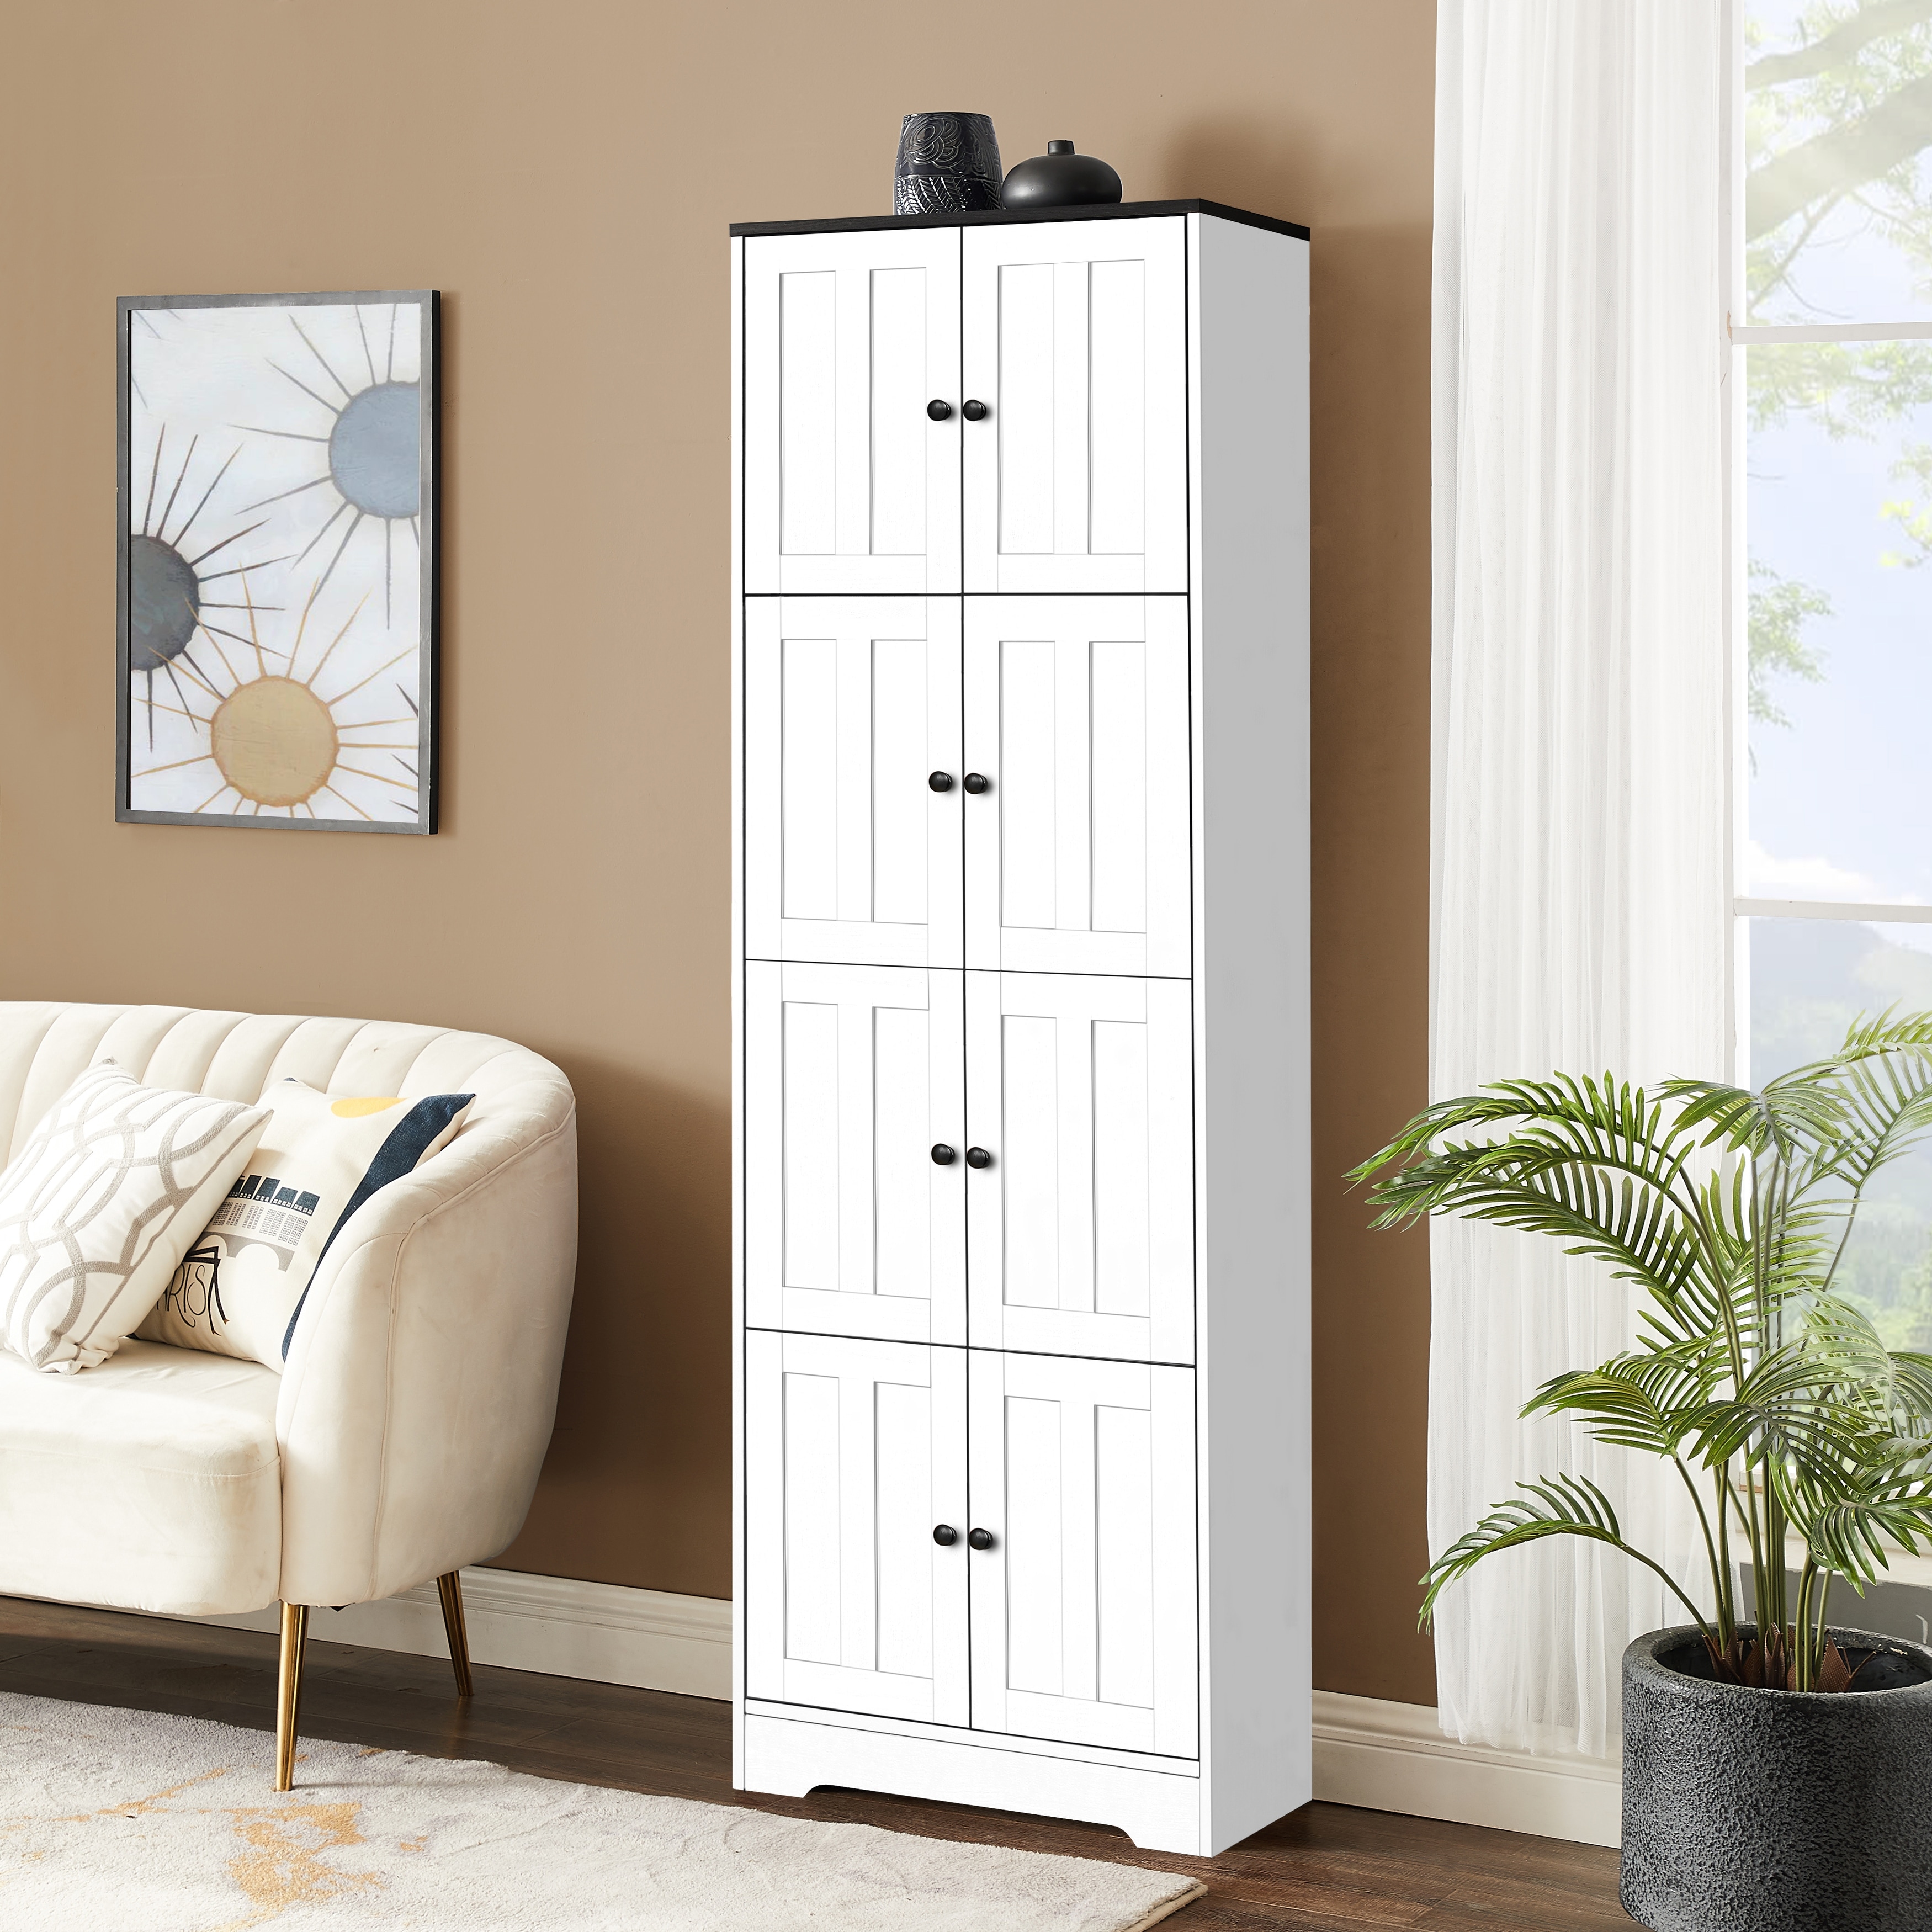 https://ak1.ostkcdn.com/images/products/is/images/direct/b79d2101d7ccdc11901de347a9de2b3899fa1ff5/Tall-Storage-Cabinet-with-4-Doors-and-4-Shelves%2C-Wall-Storage-Cabinet-for-Living-Room%2C-Kitchen%2C-Office%2C-Bedroom%2C-Bathroom.jpg